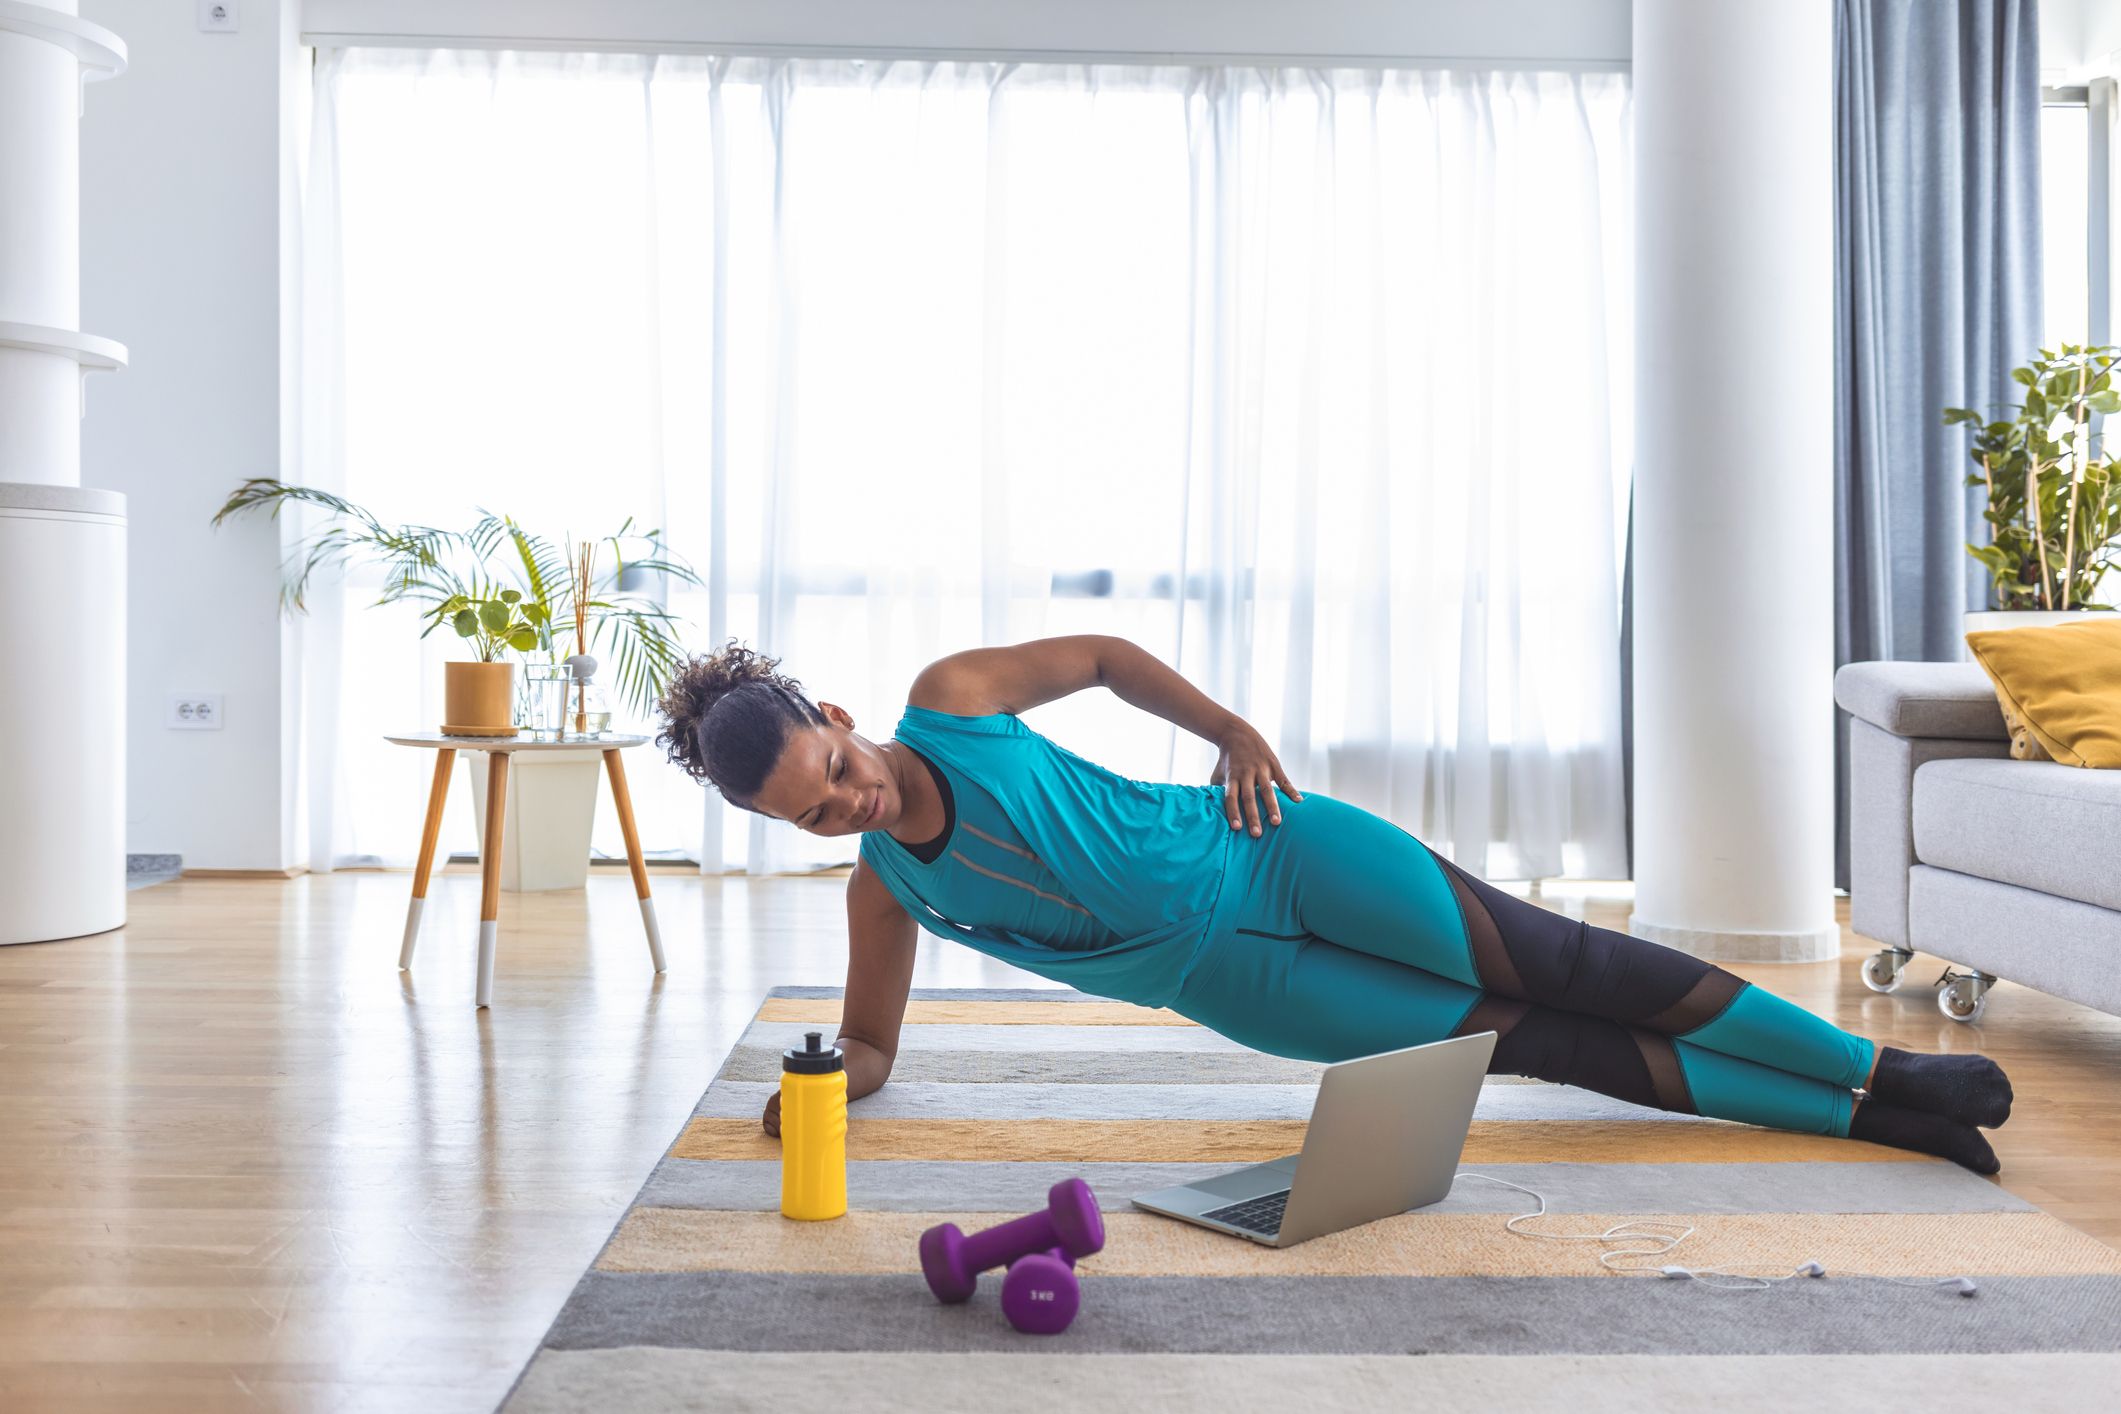 Pilates for Beginners: A Simple Core Workout to Try at Home